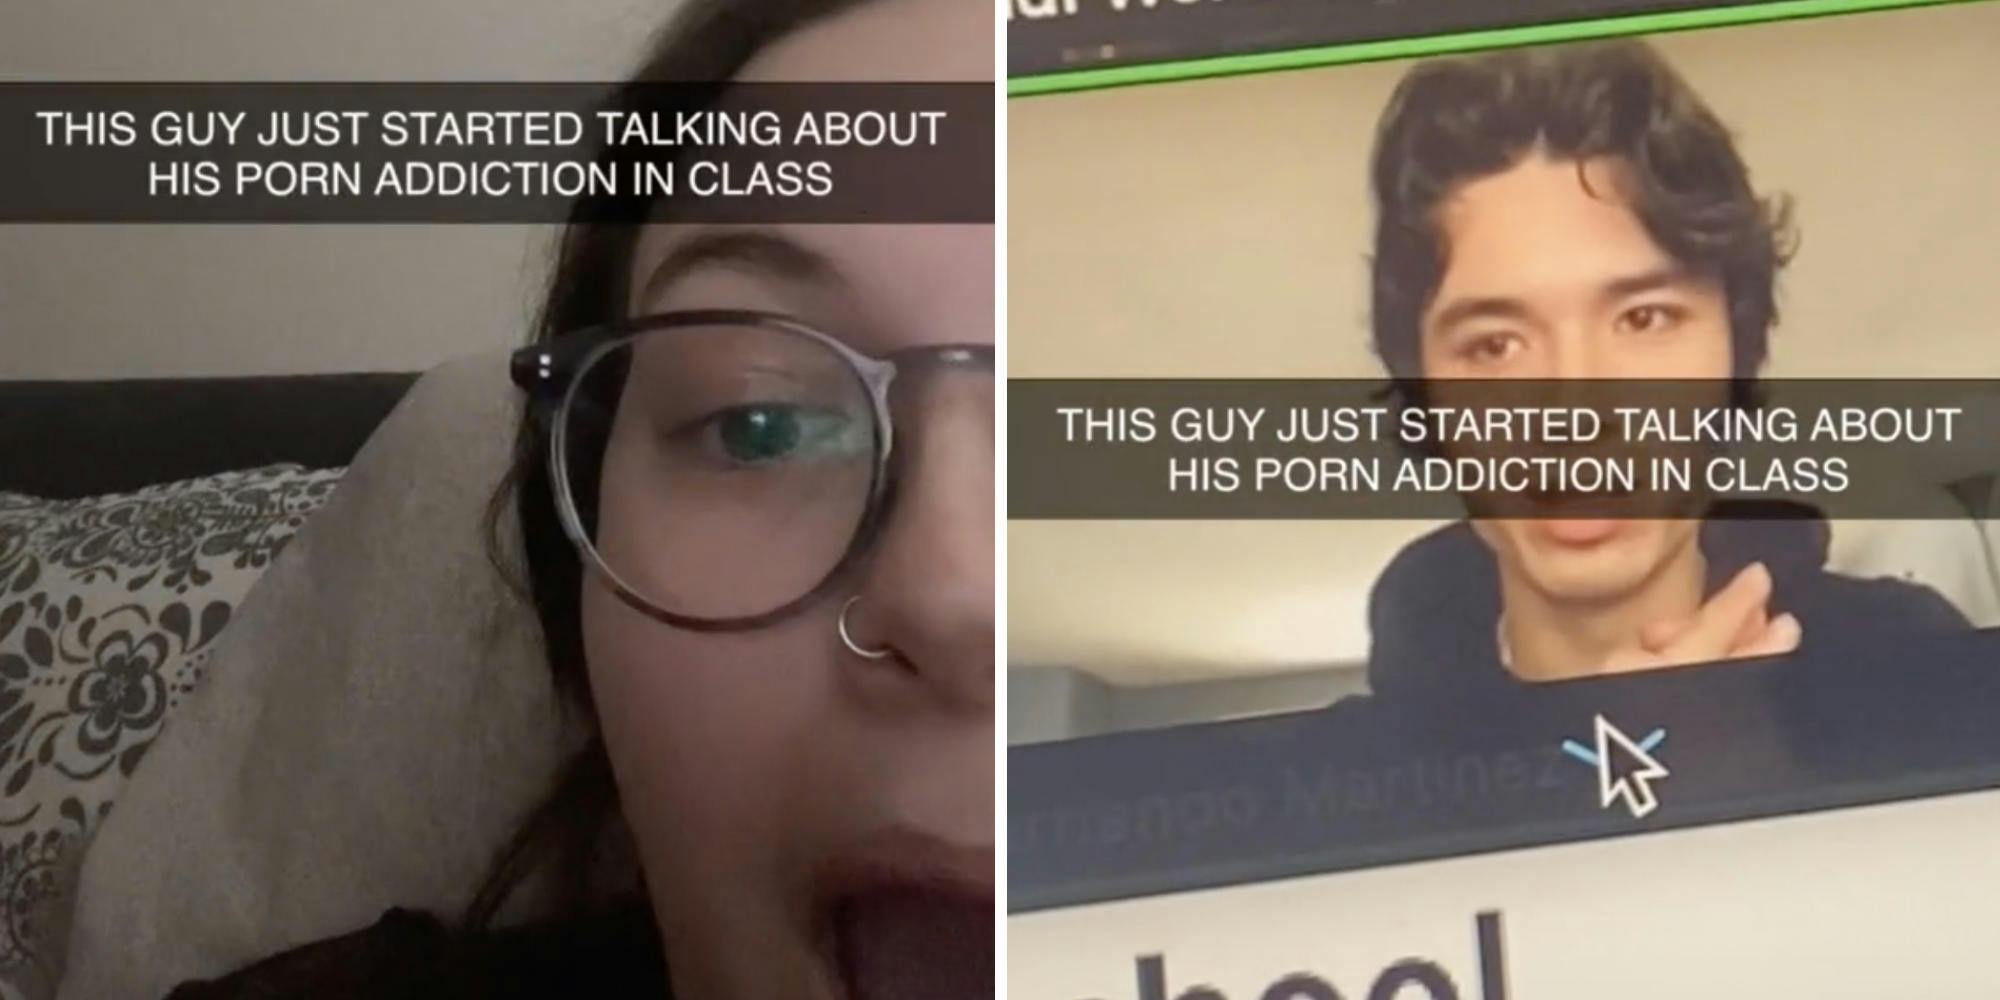 College Student Discusses his Porn Addiction During Zoom Class